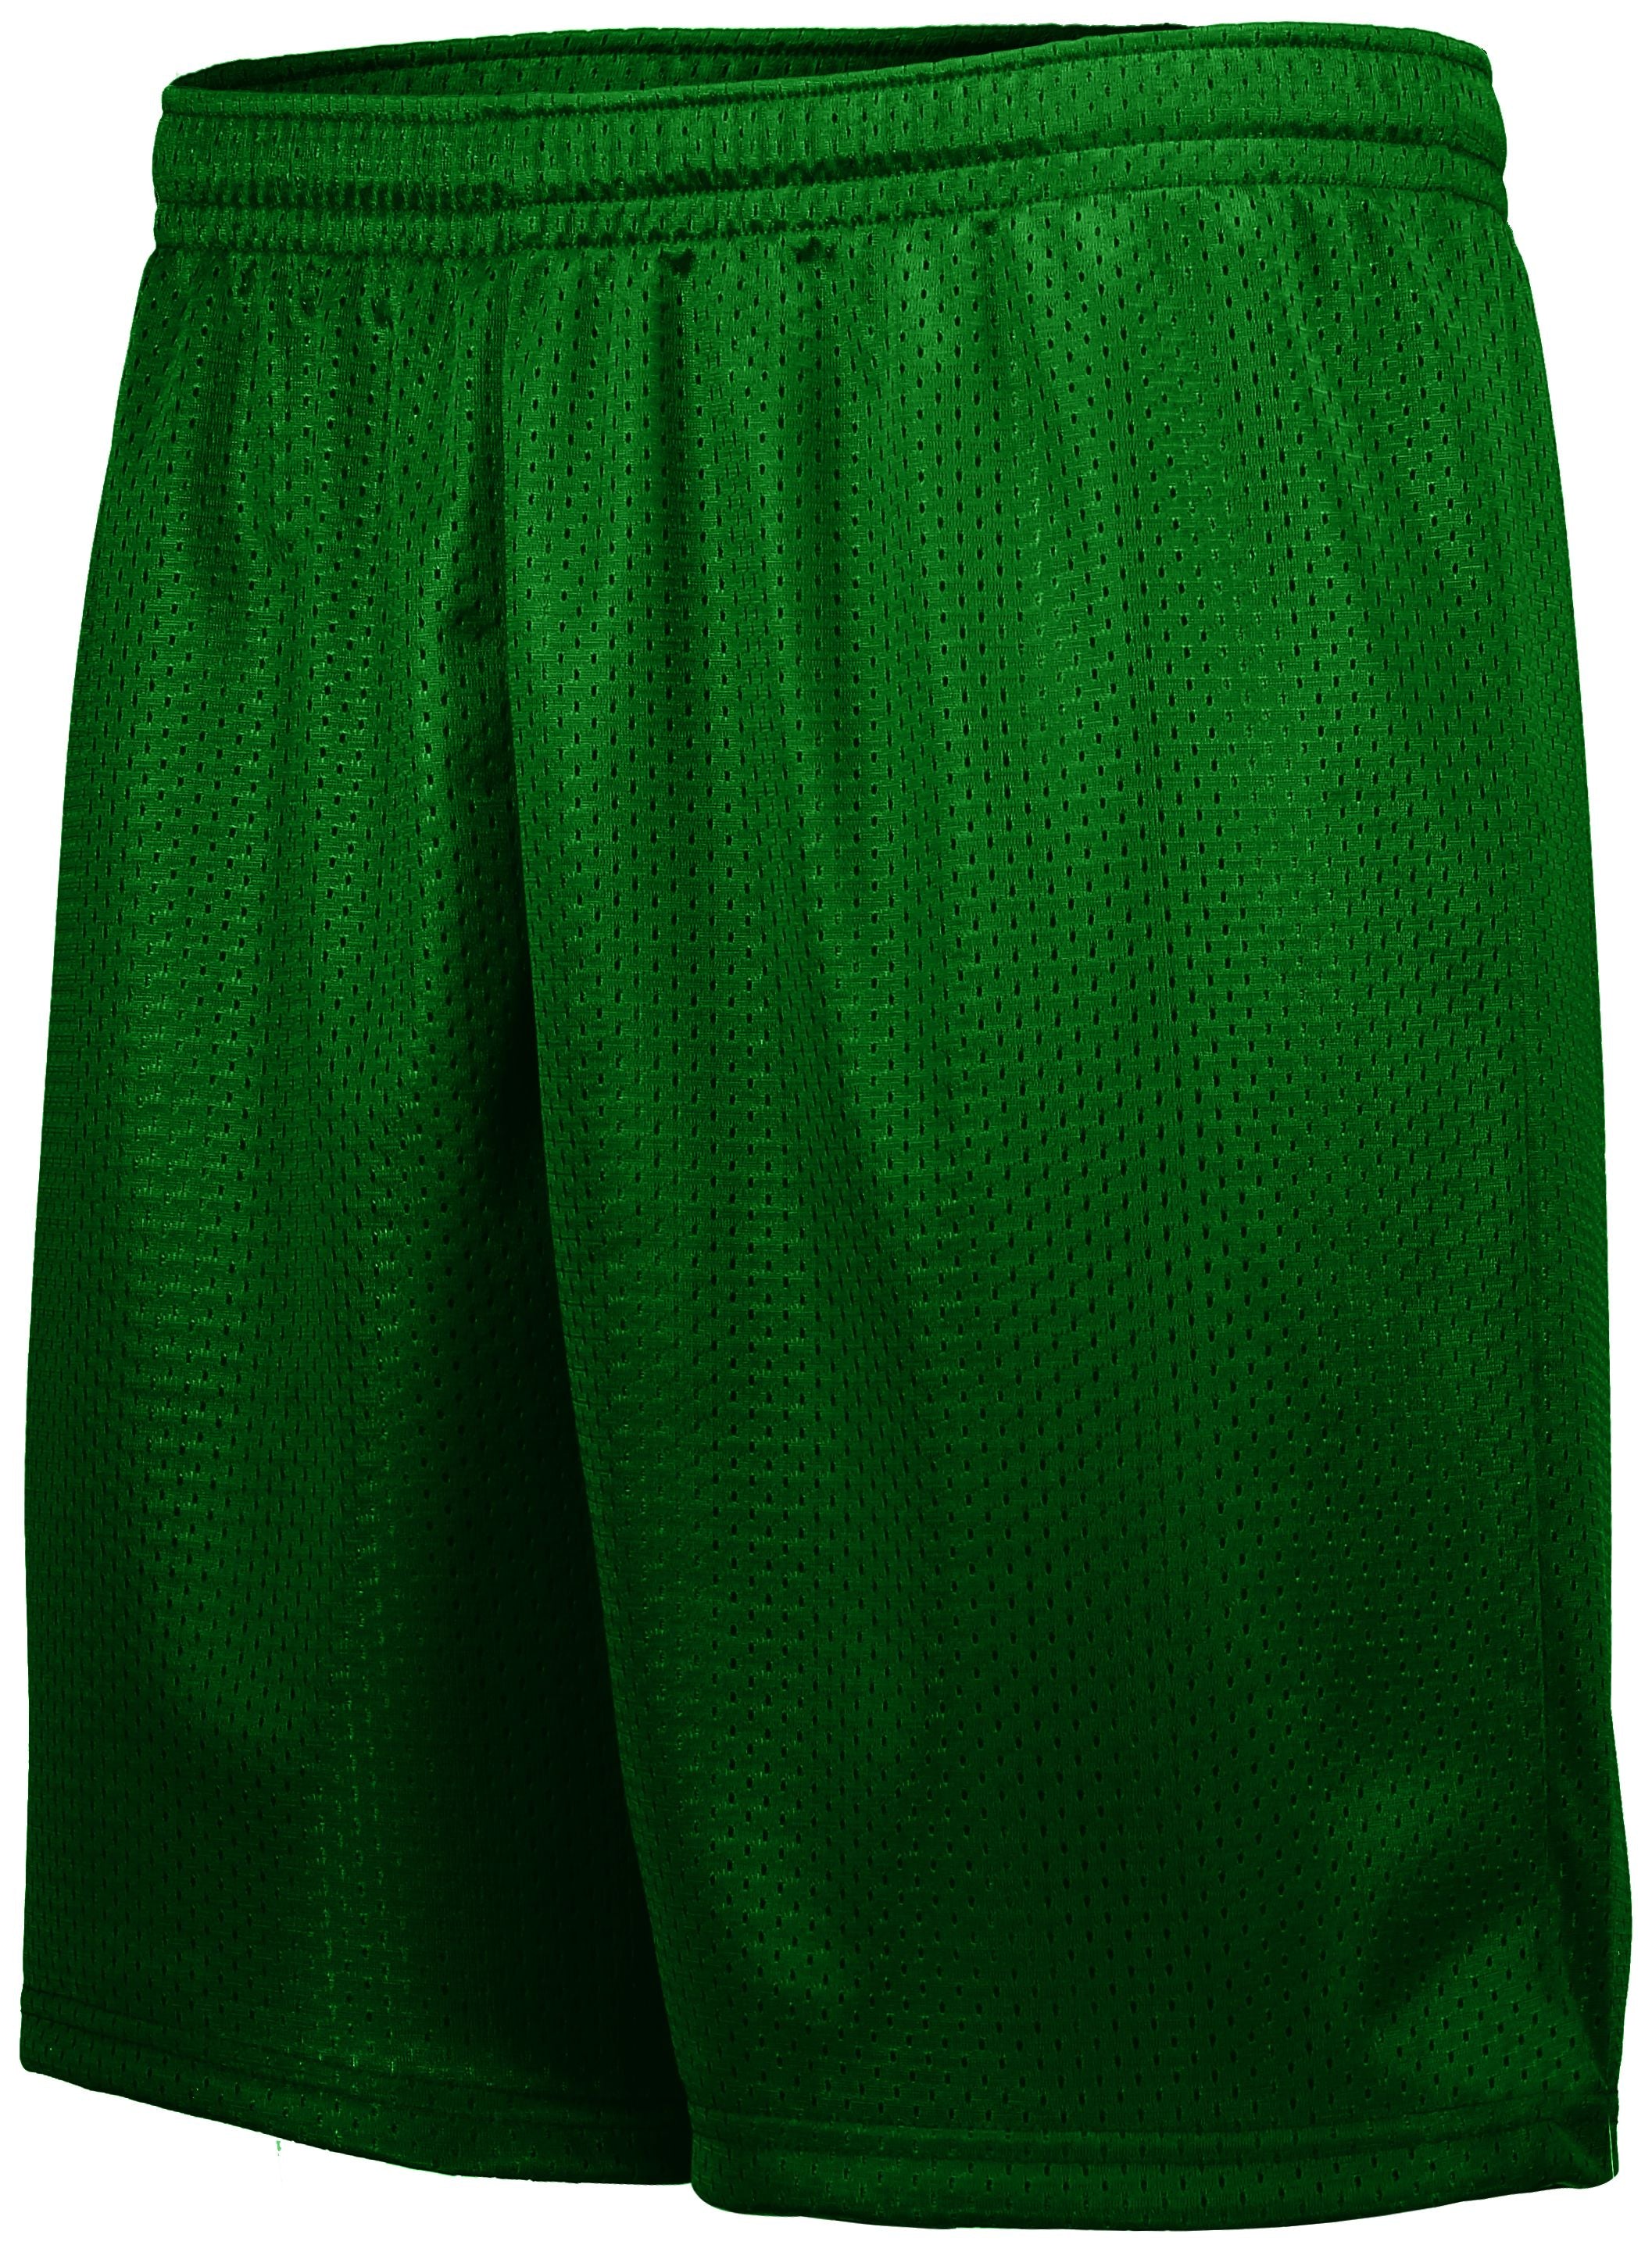 Augusta Sportswear Tricot Mesh Shorts in Dark Green  -Part of the Adult, Adult-Shorts, Augusta-Products product lines at KanaleyCreations.com